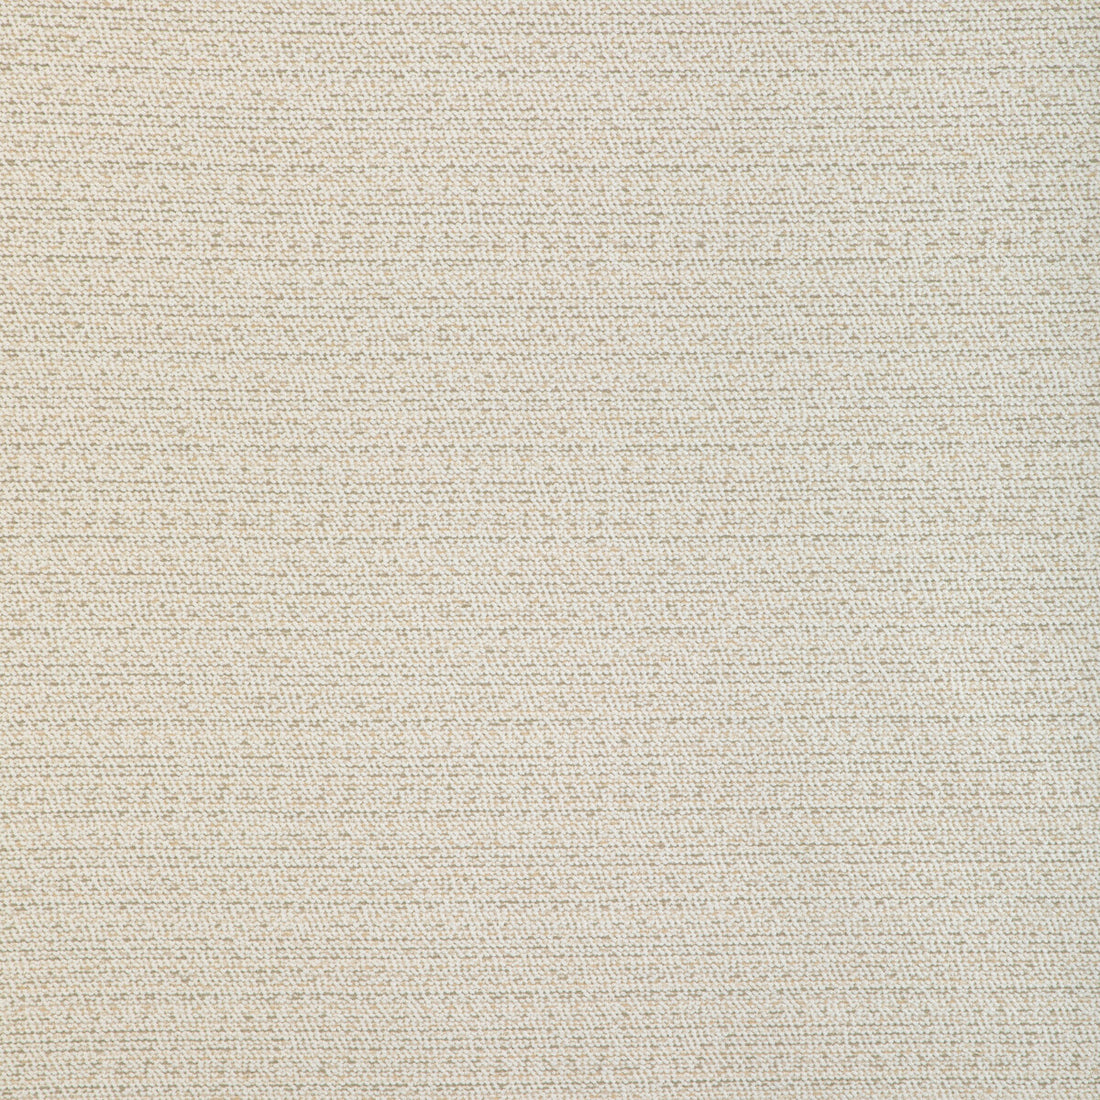 Linden fabric in buff color - pattern 37047.116.0 - by Kravet Design in the Thom Filicia Latitude collection